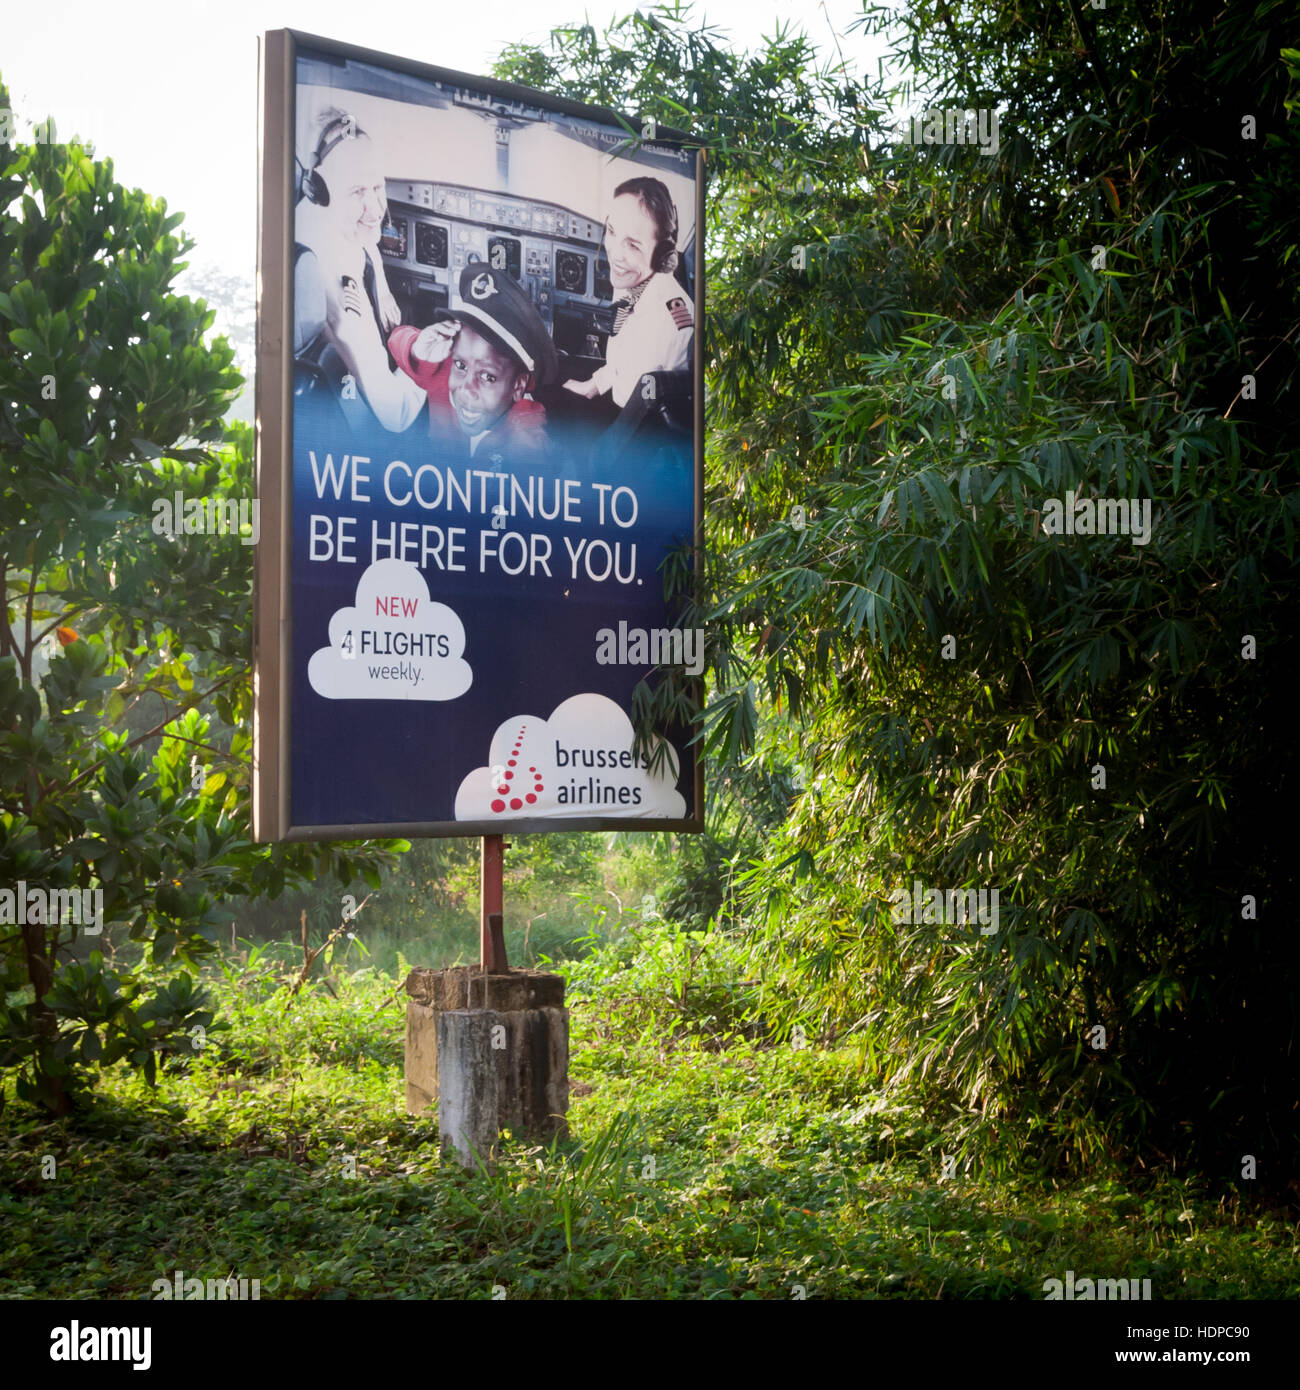 Air connections are a necessary prerequisite for tourism. "We continue to be here for you" Brussels Airways. Billboard advertising one of the weekly two direct flights from Europe to Freetown, Sierra Leone. Stock Photo